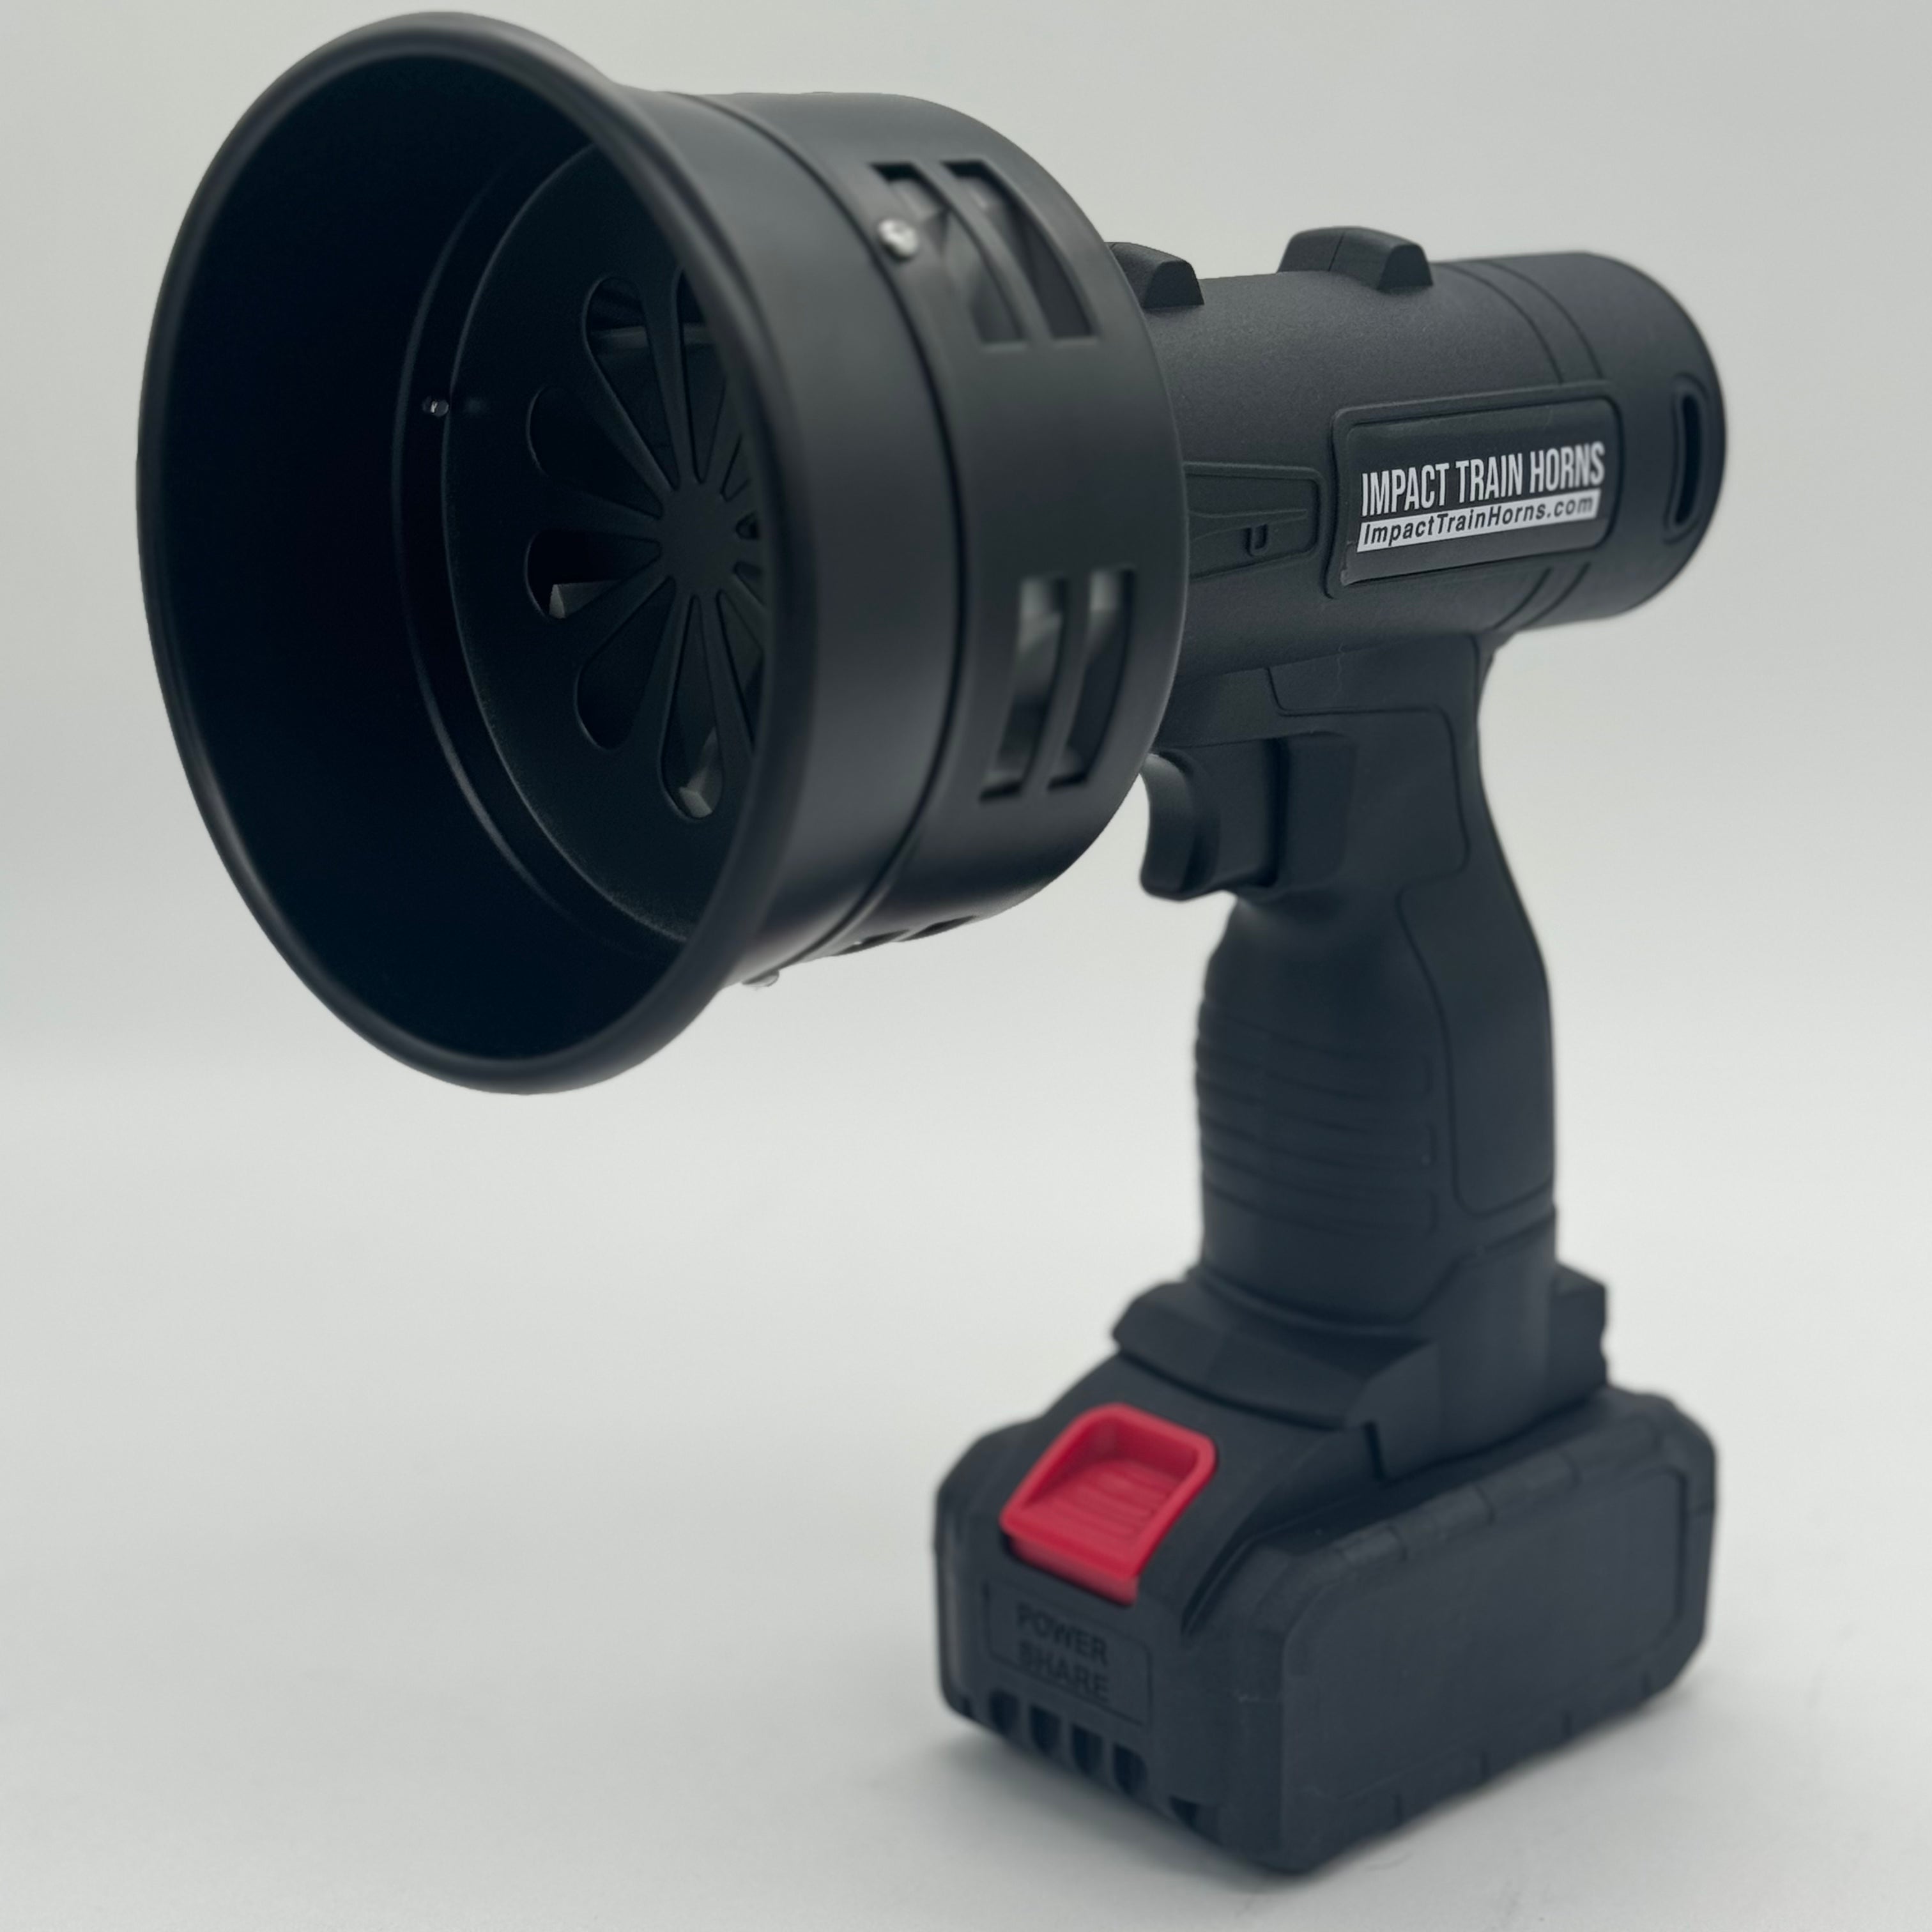 Impact Siren Horn with Remote – Impact Train Horns